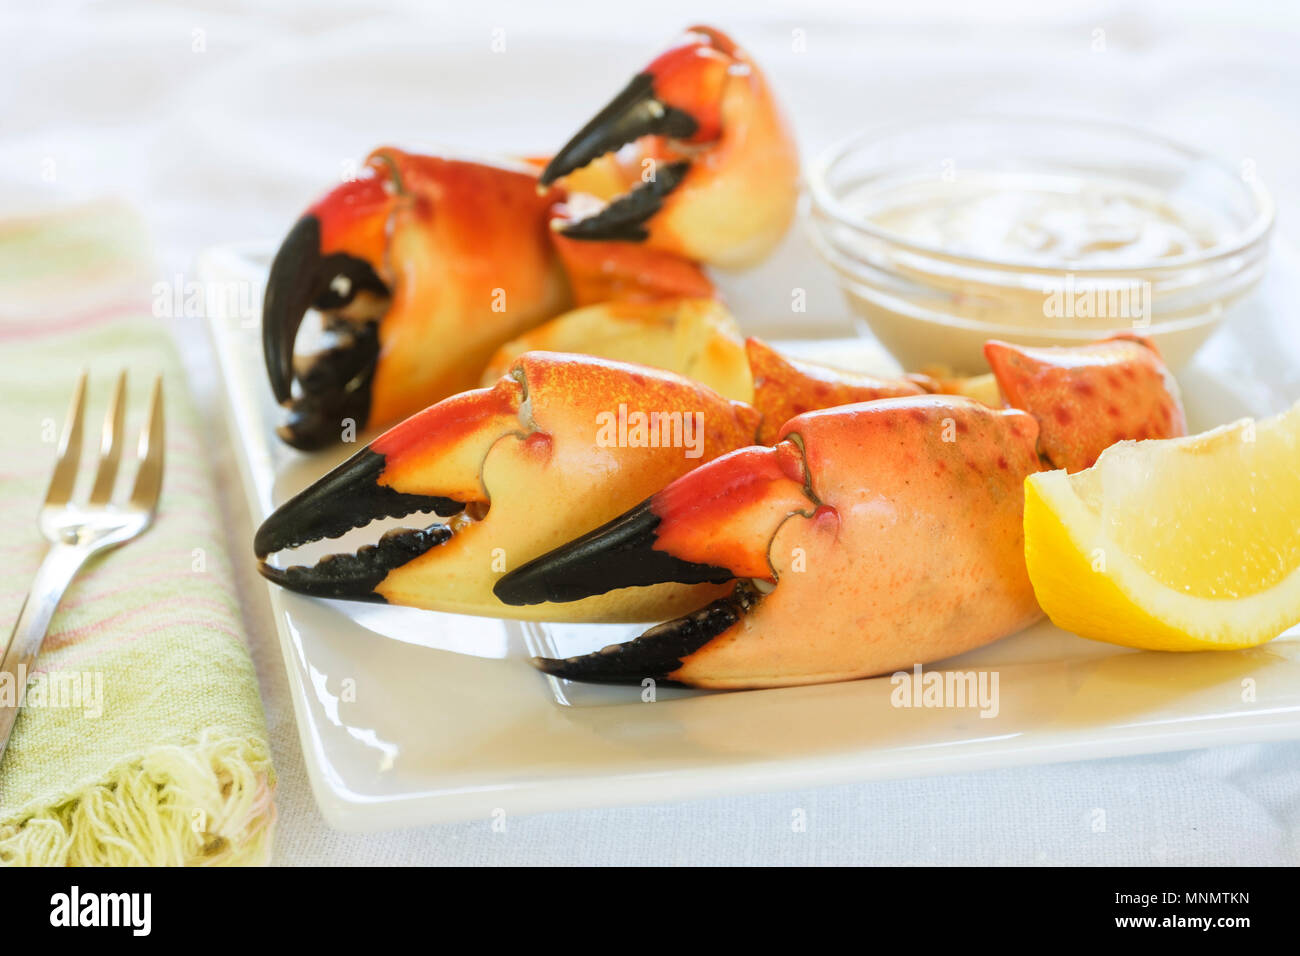 Stone crab claws meal Stock Photo - Alamy